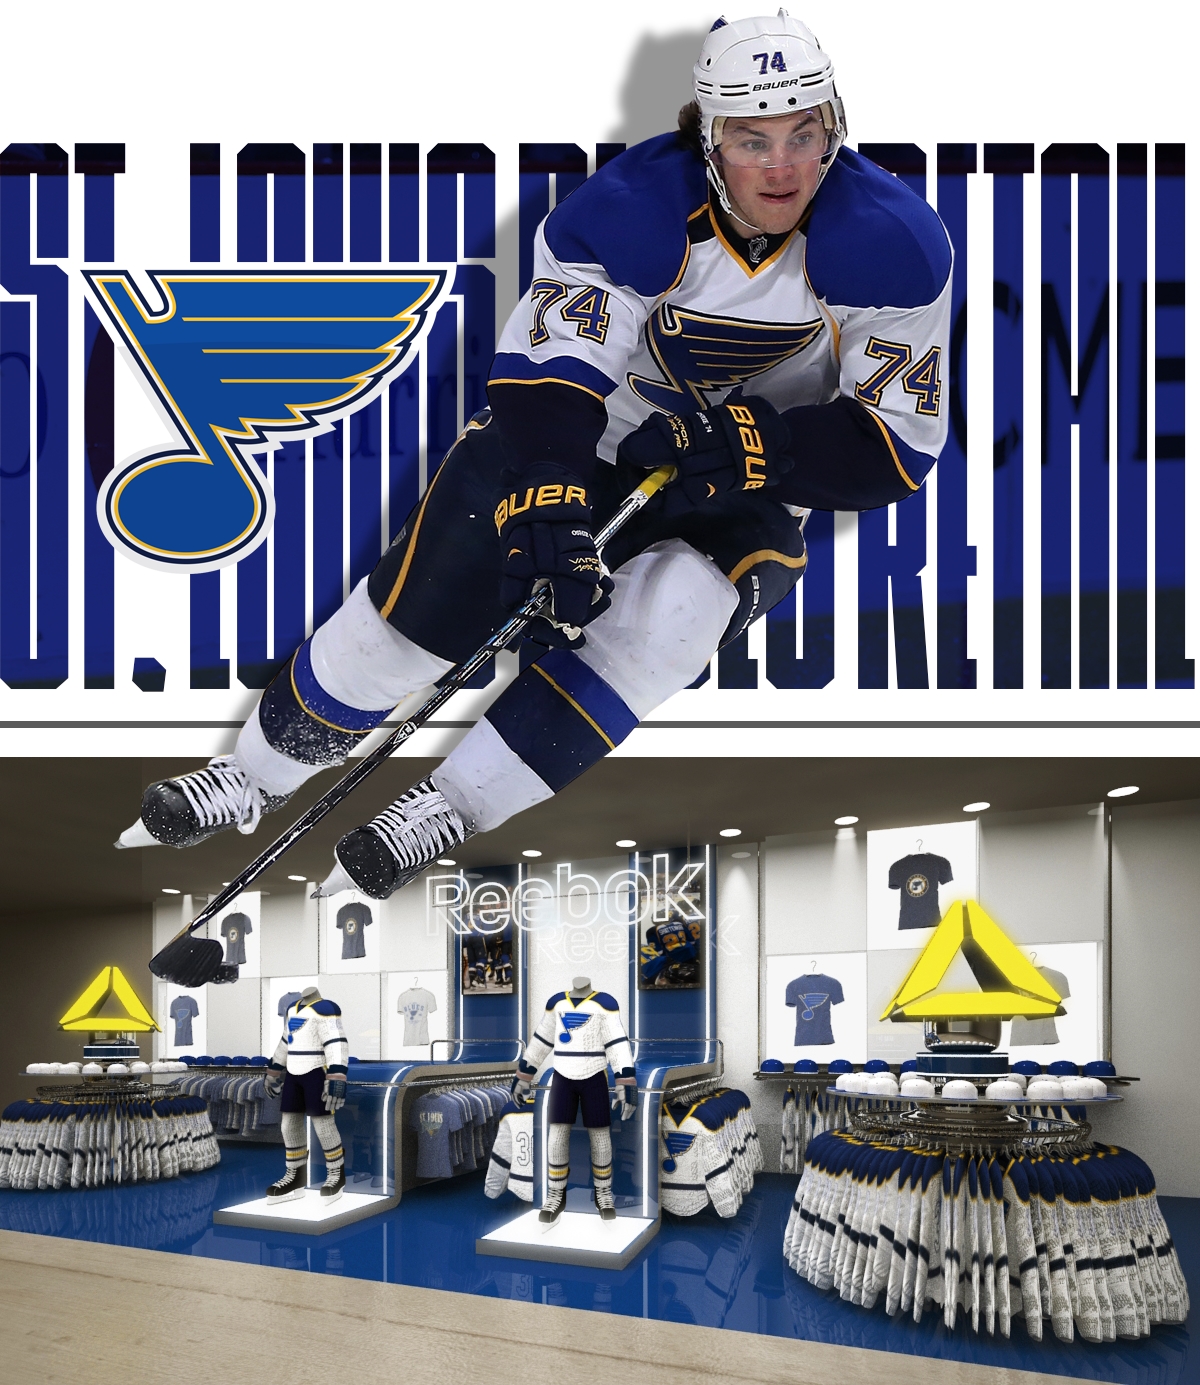 St. Louis Blues flagship retail store featuring Reebok, designed by Justin Winget and rendered by Tim Seinold